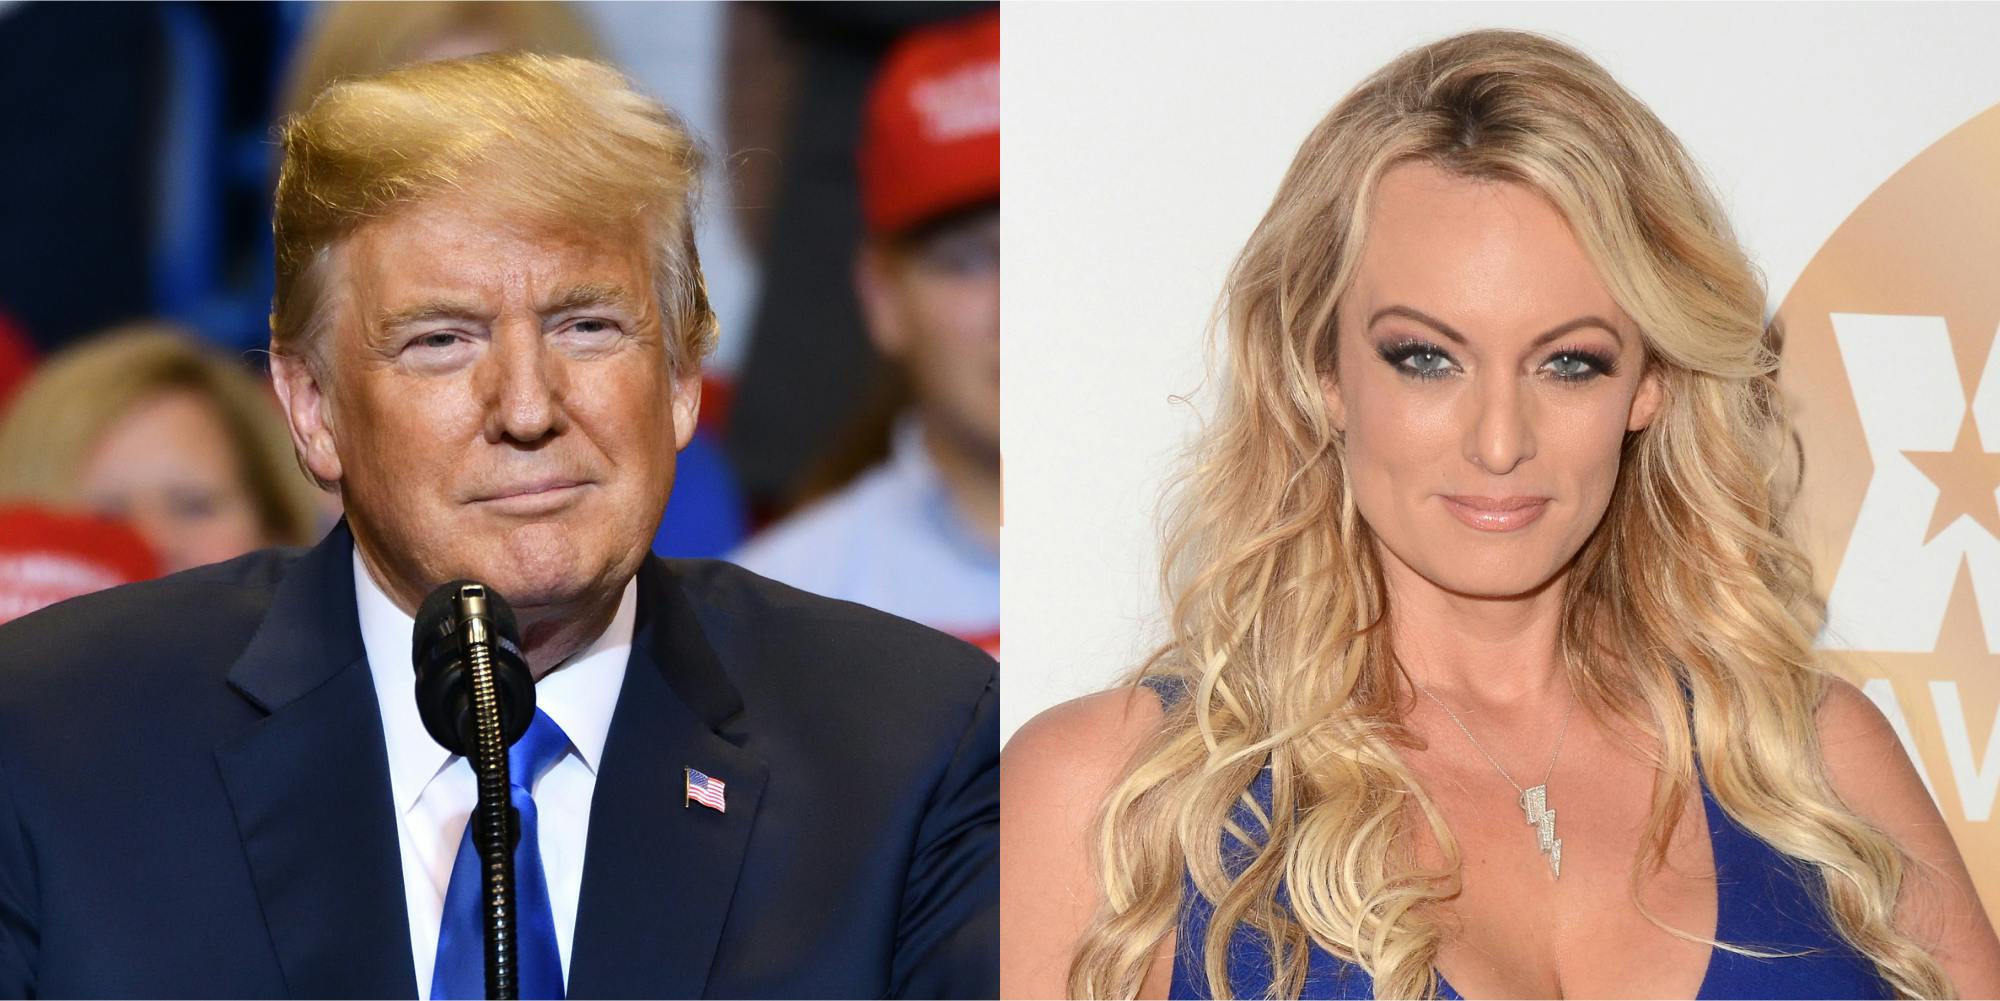 Yes, people are watching Stormy Daniels porn again